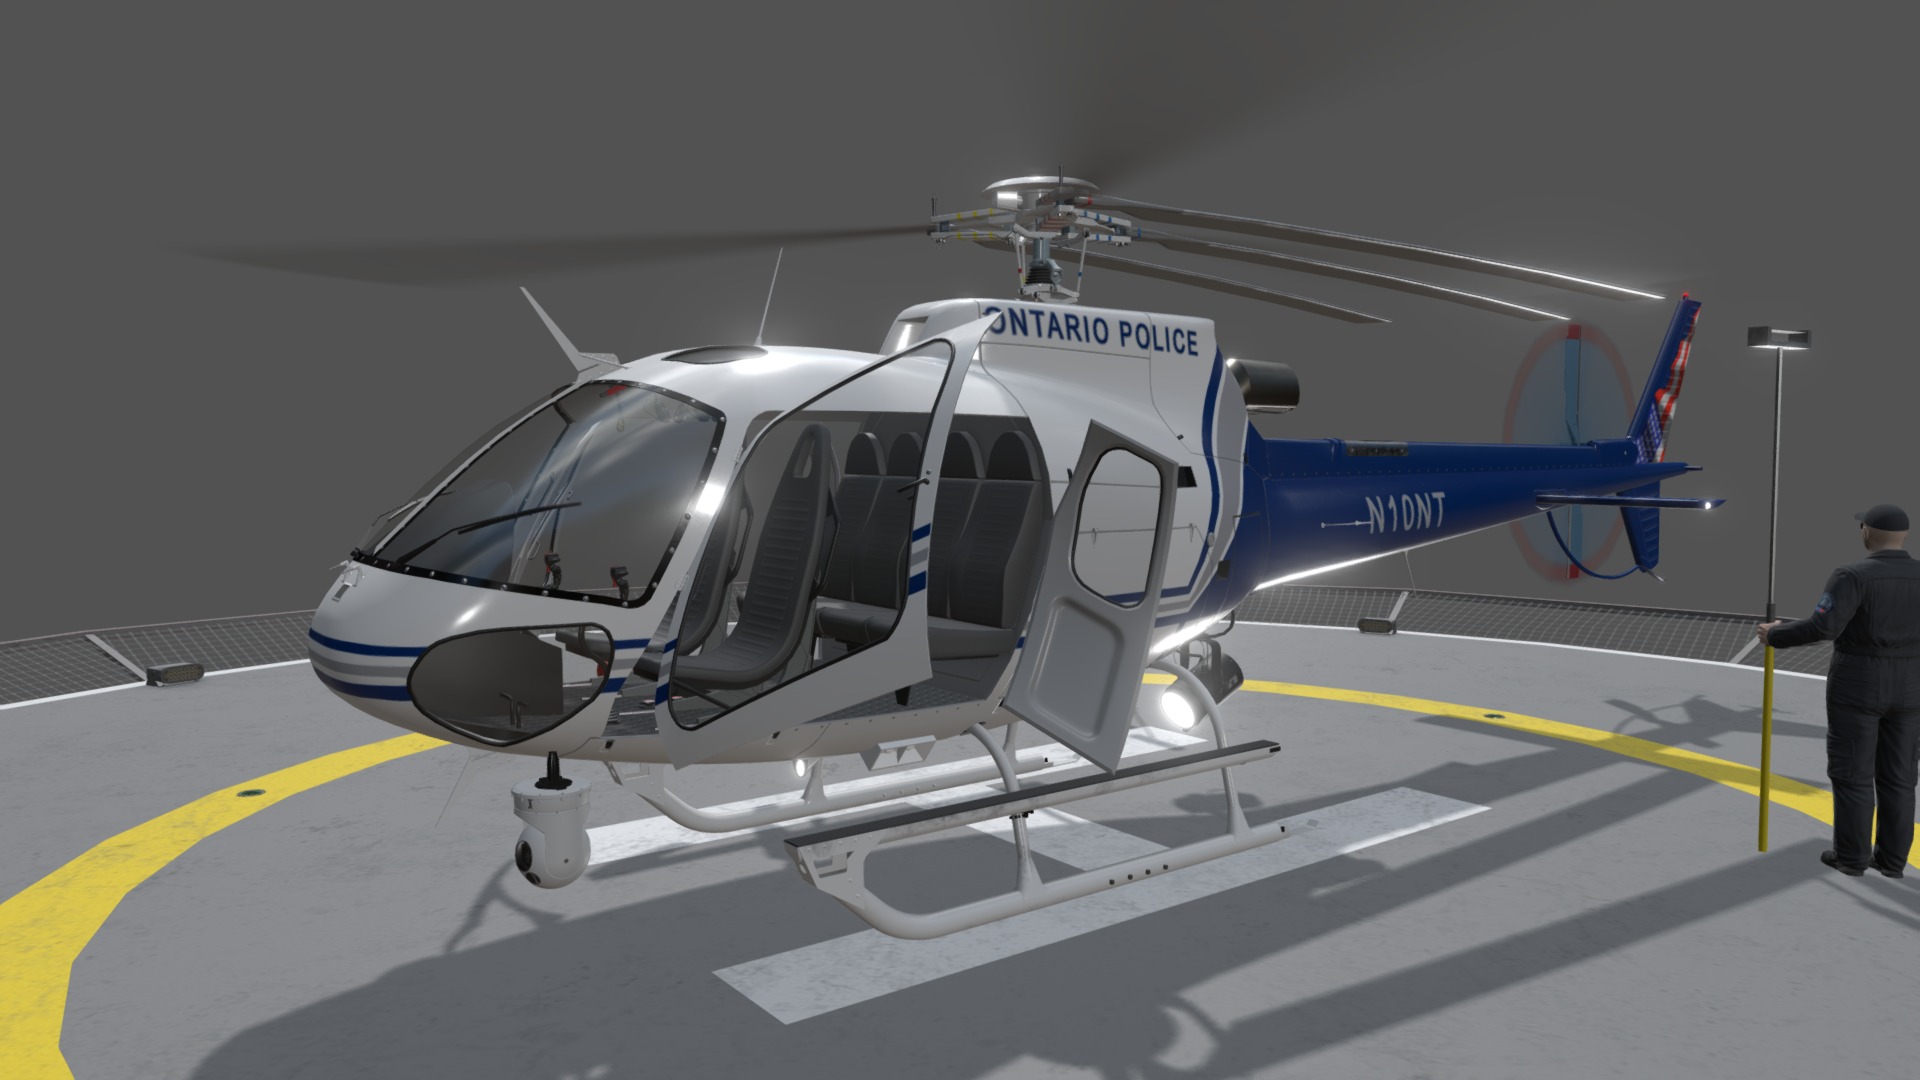 3D model AS-350 Ontario Police Animated - This is a 3D model of the AS-350 Ontario Police Animated. The 3D model is about a helicopter on a runway.